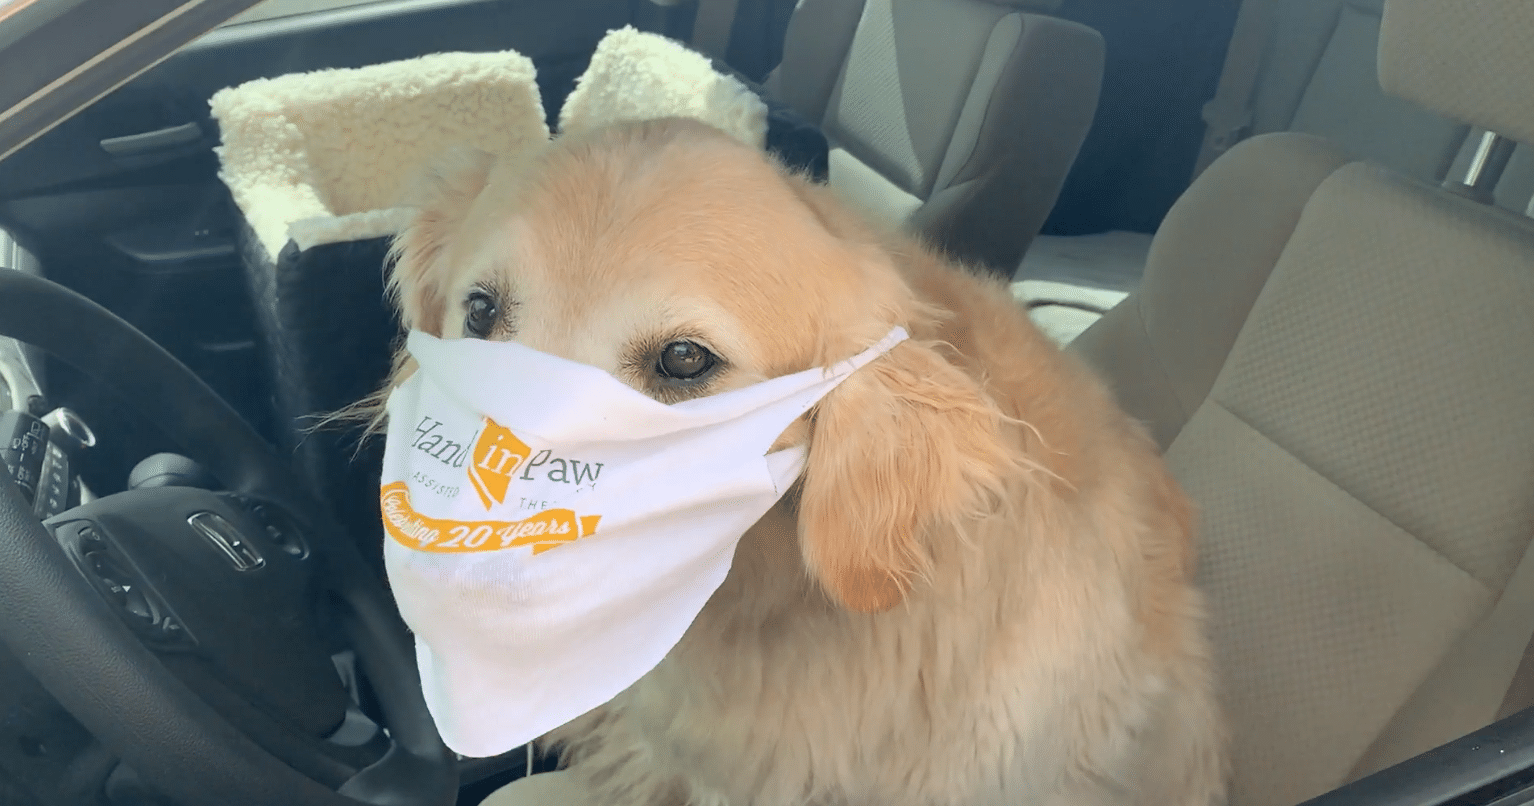 Even dogs can wear masks